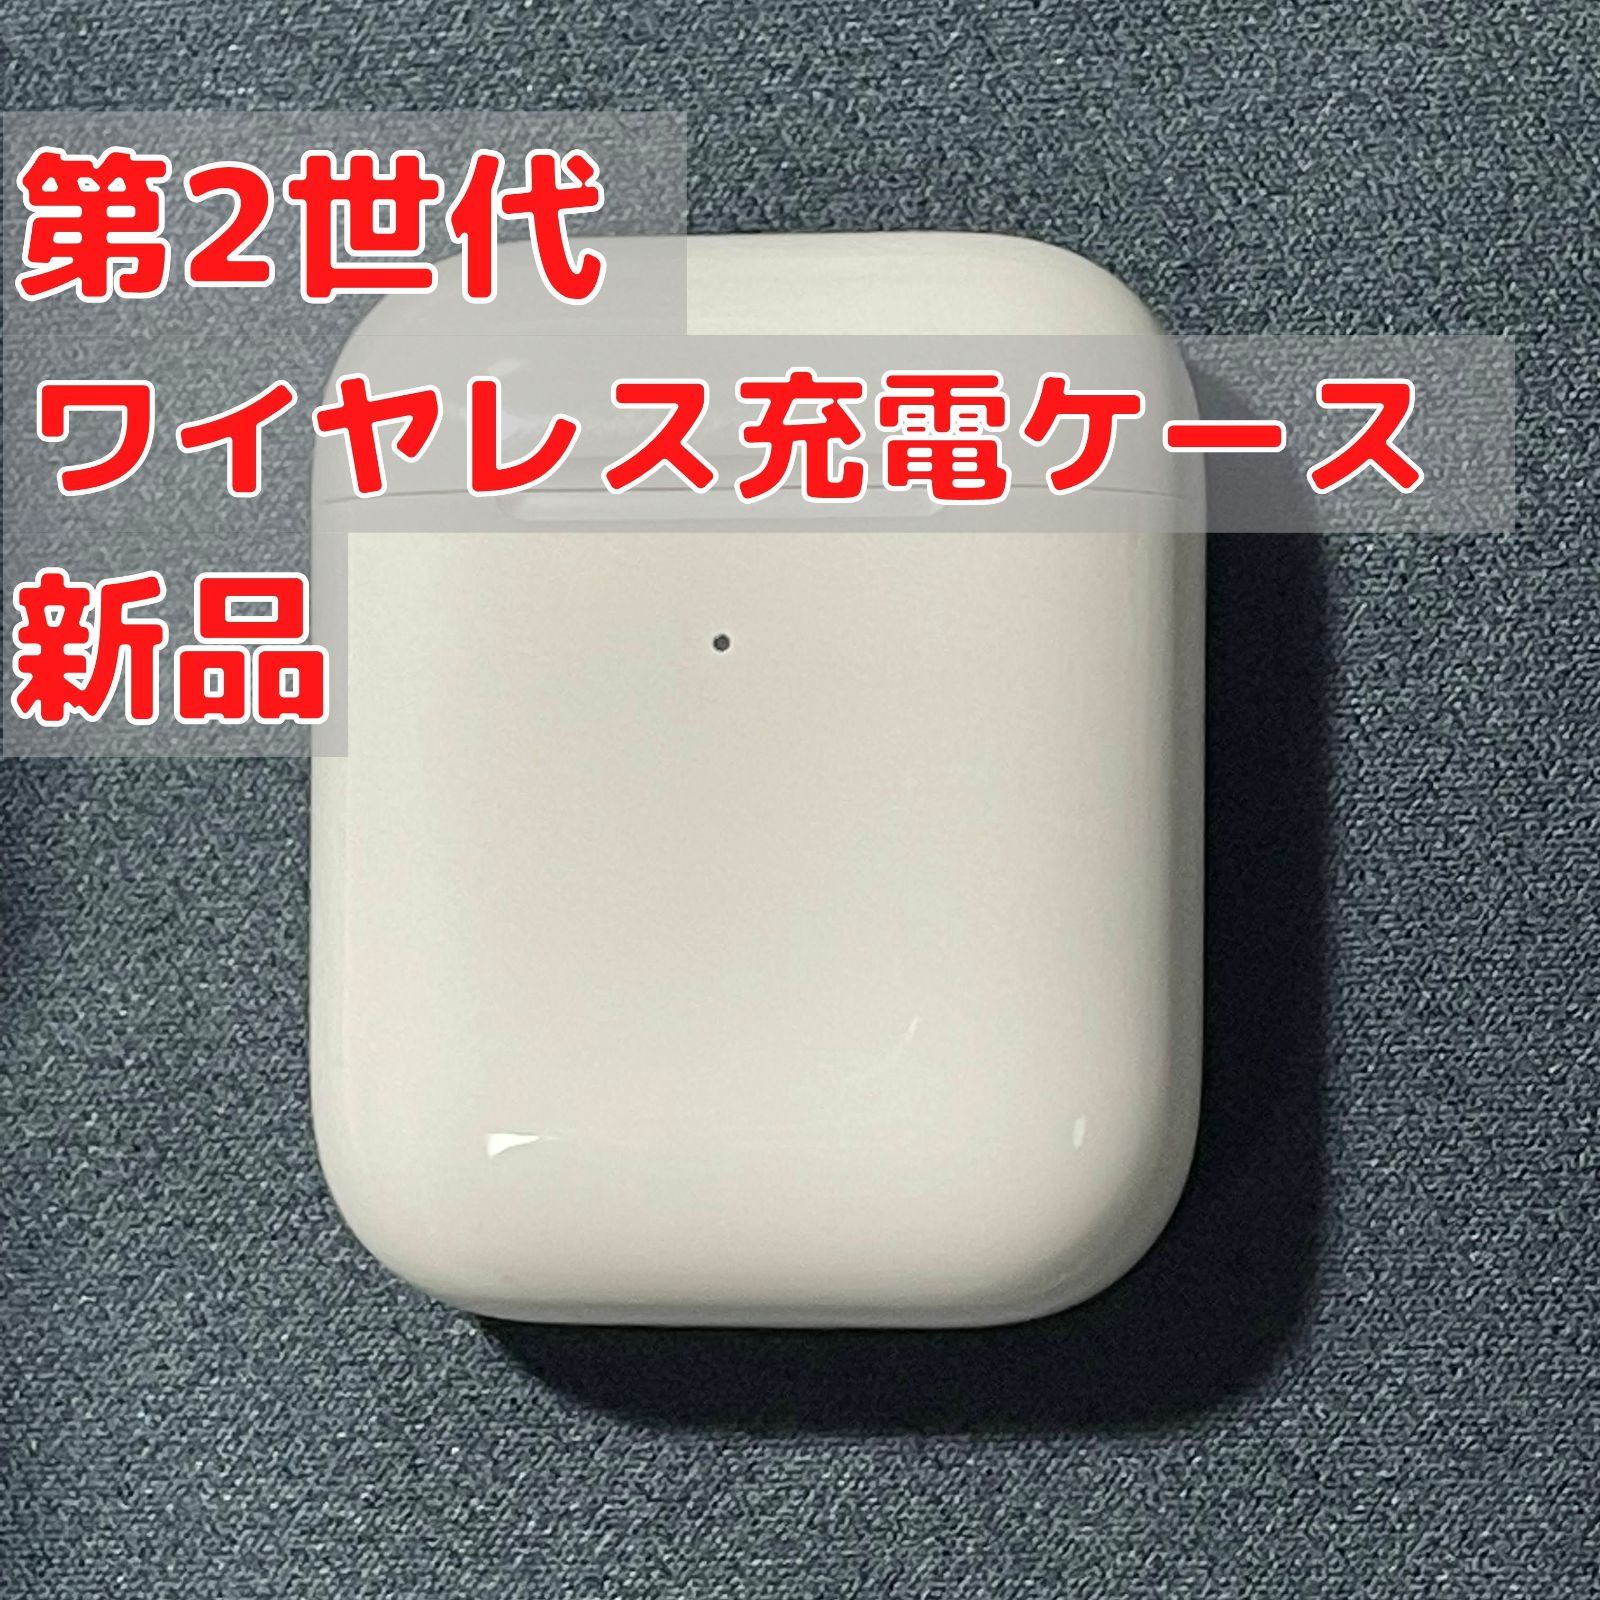 Apple AirPods 第二世代 エアーポッズ ワイヤレス充電ケース純正品